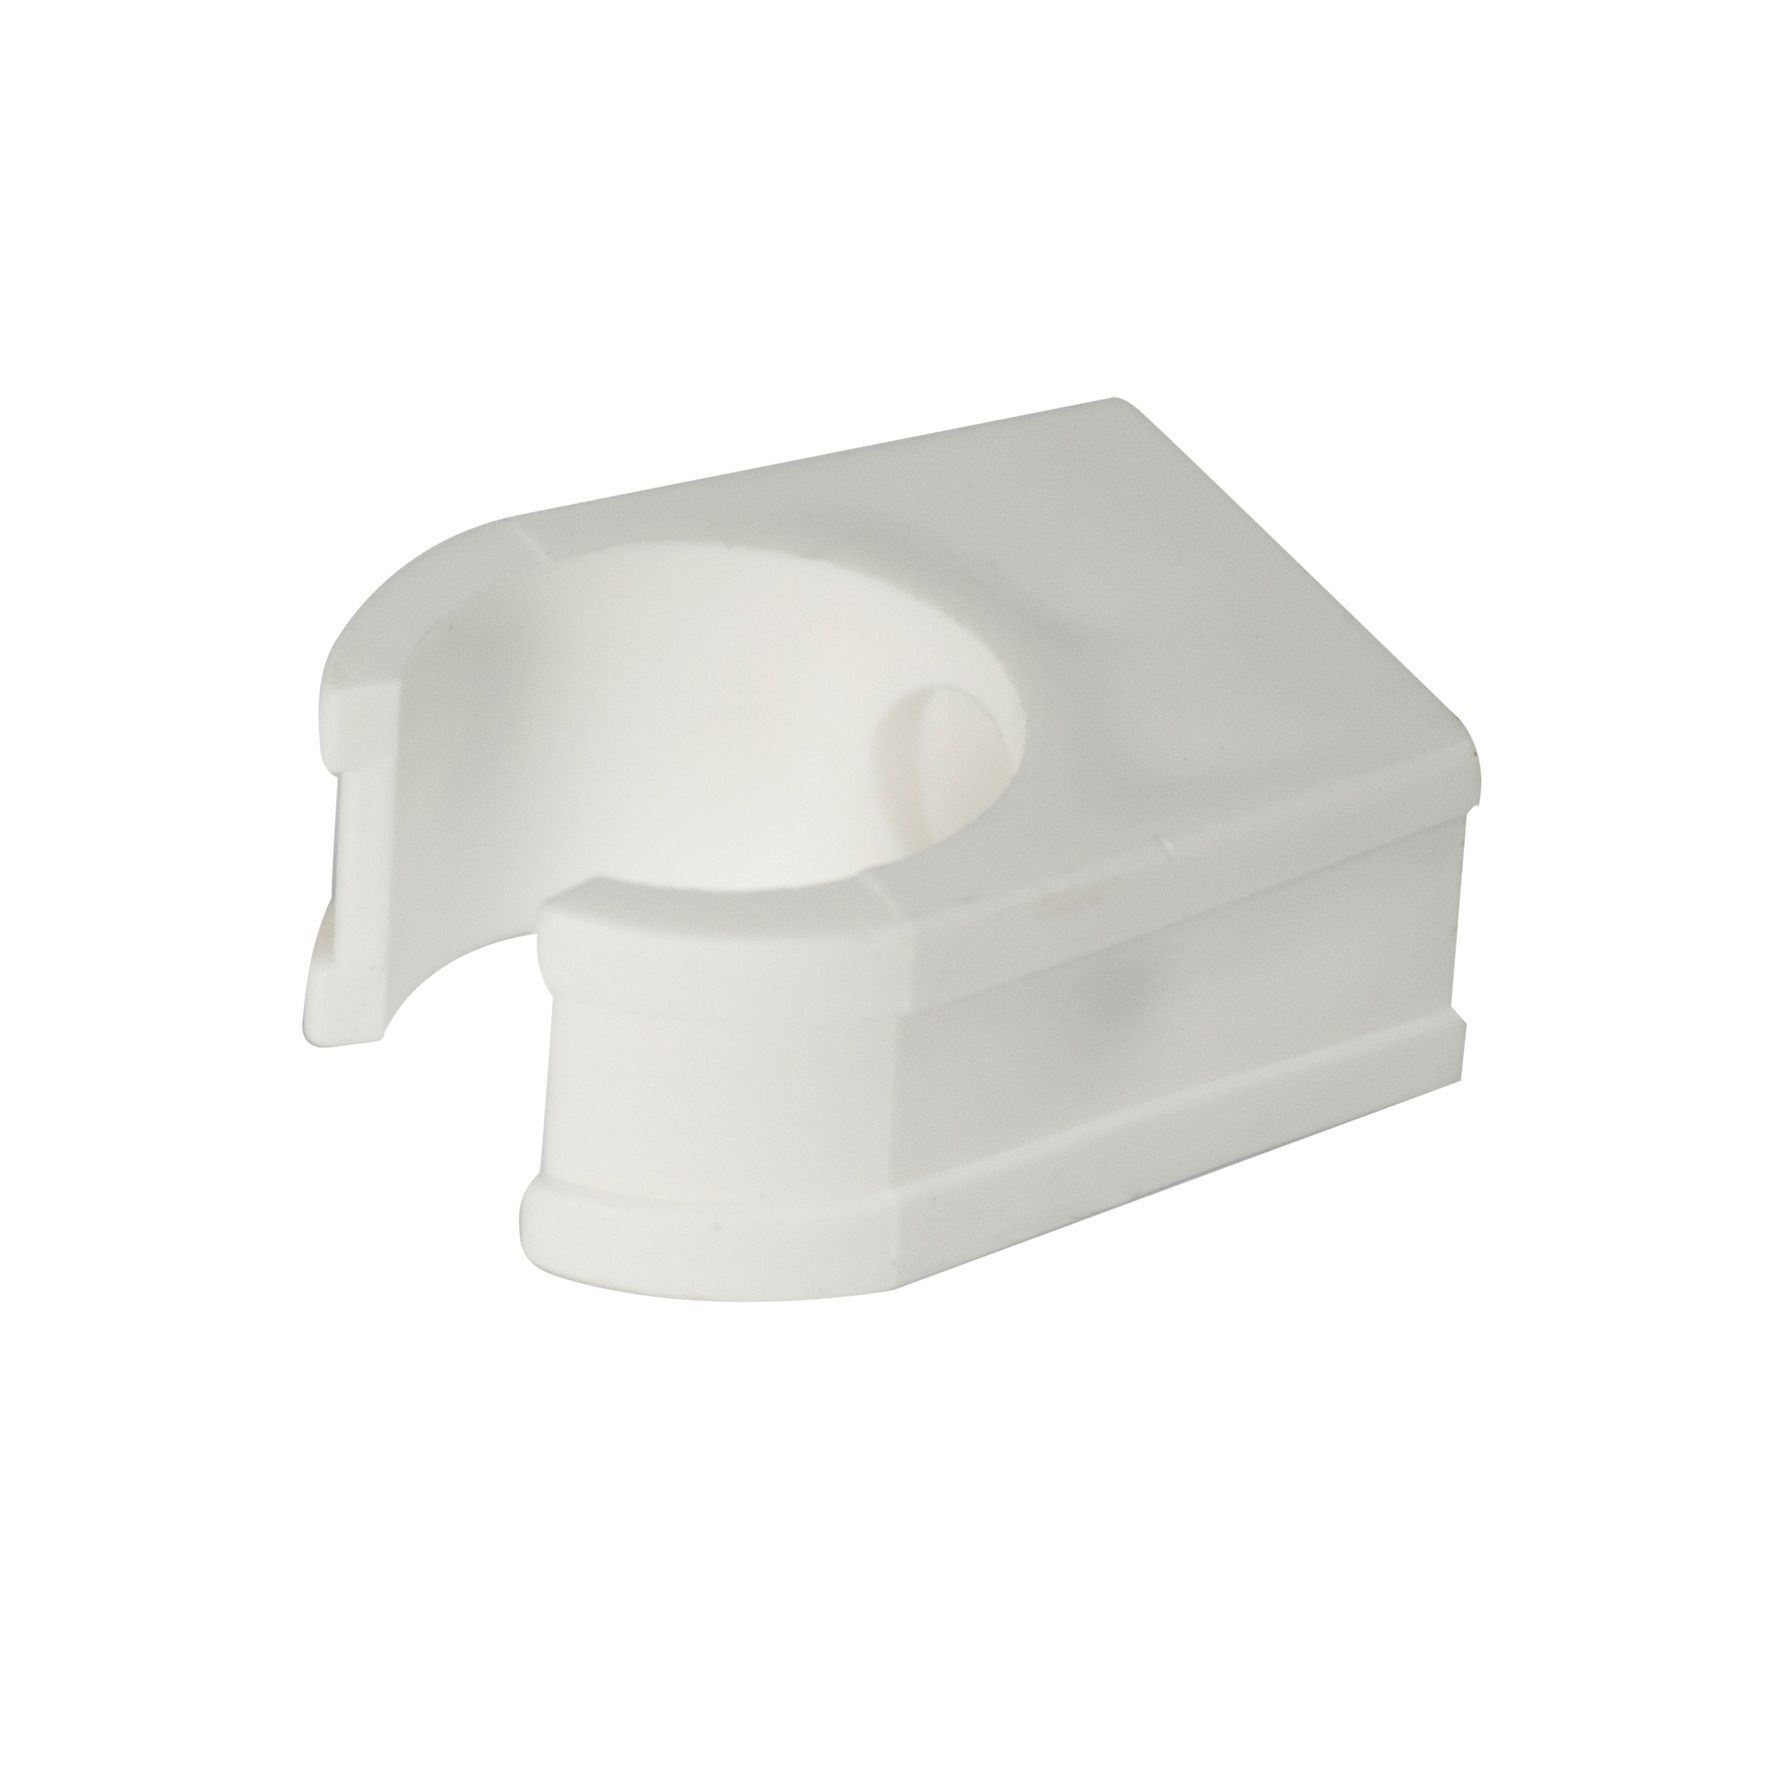 Image of FloPlast OS16W Overflow System Pipe Clip - White 21.5mm Pack of 4